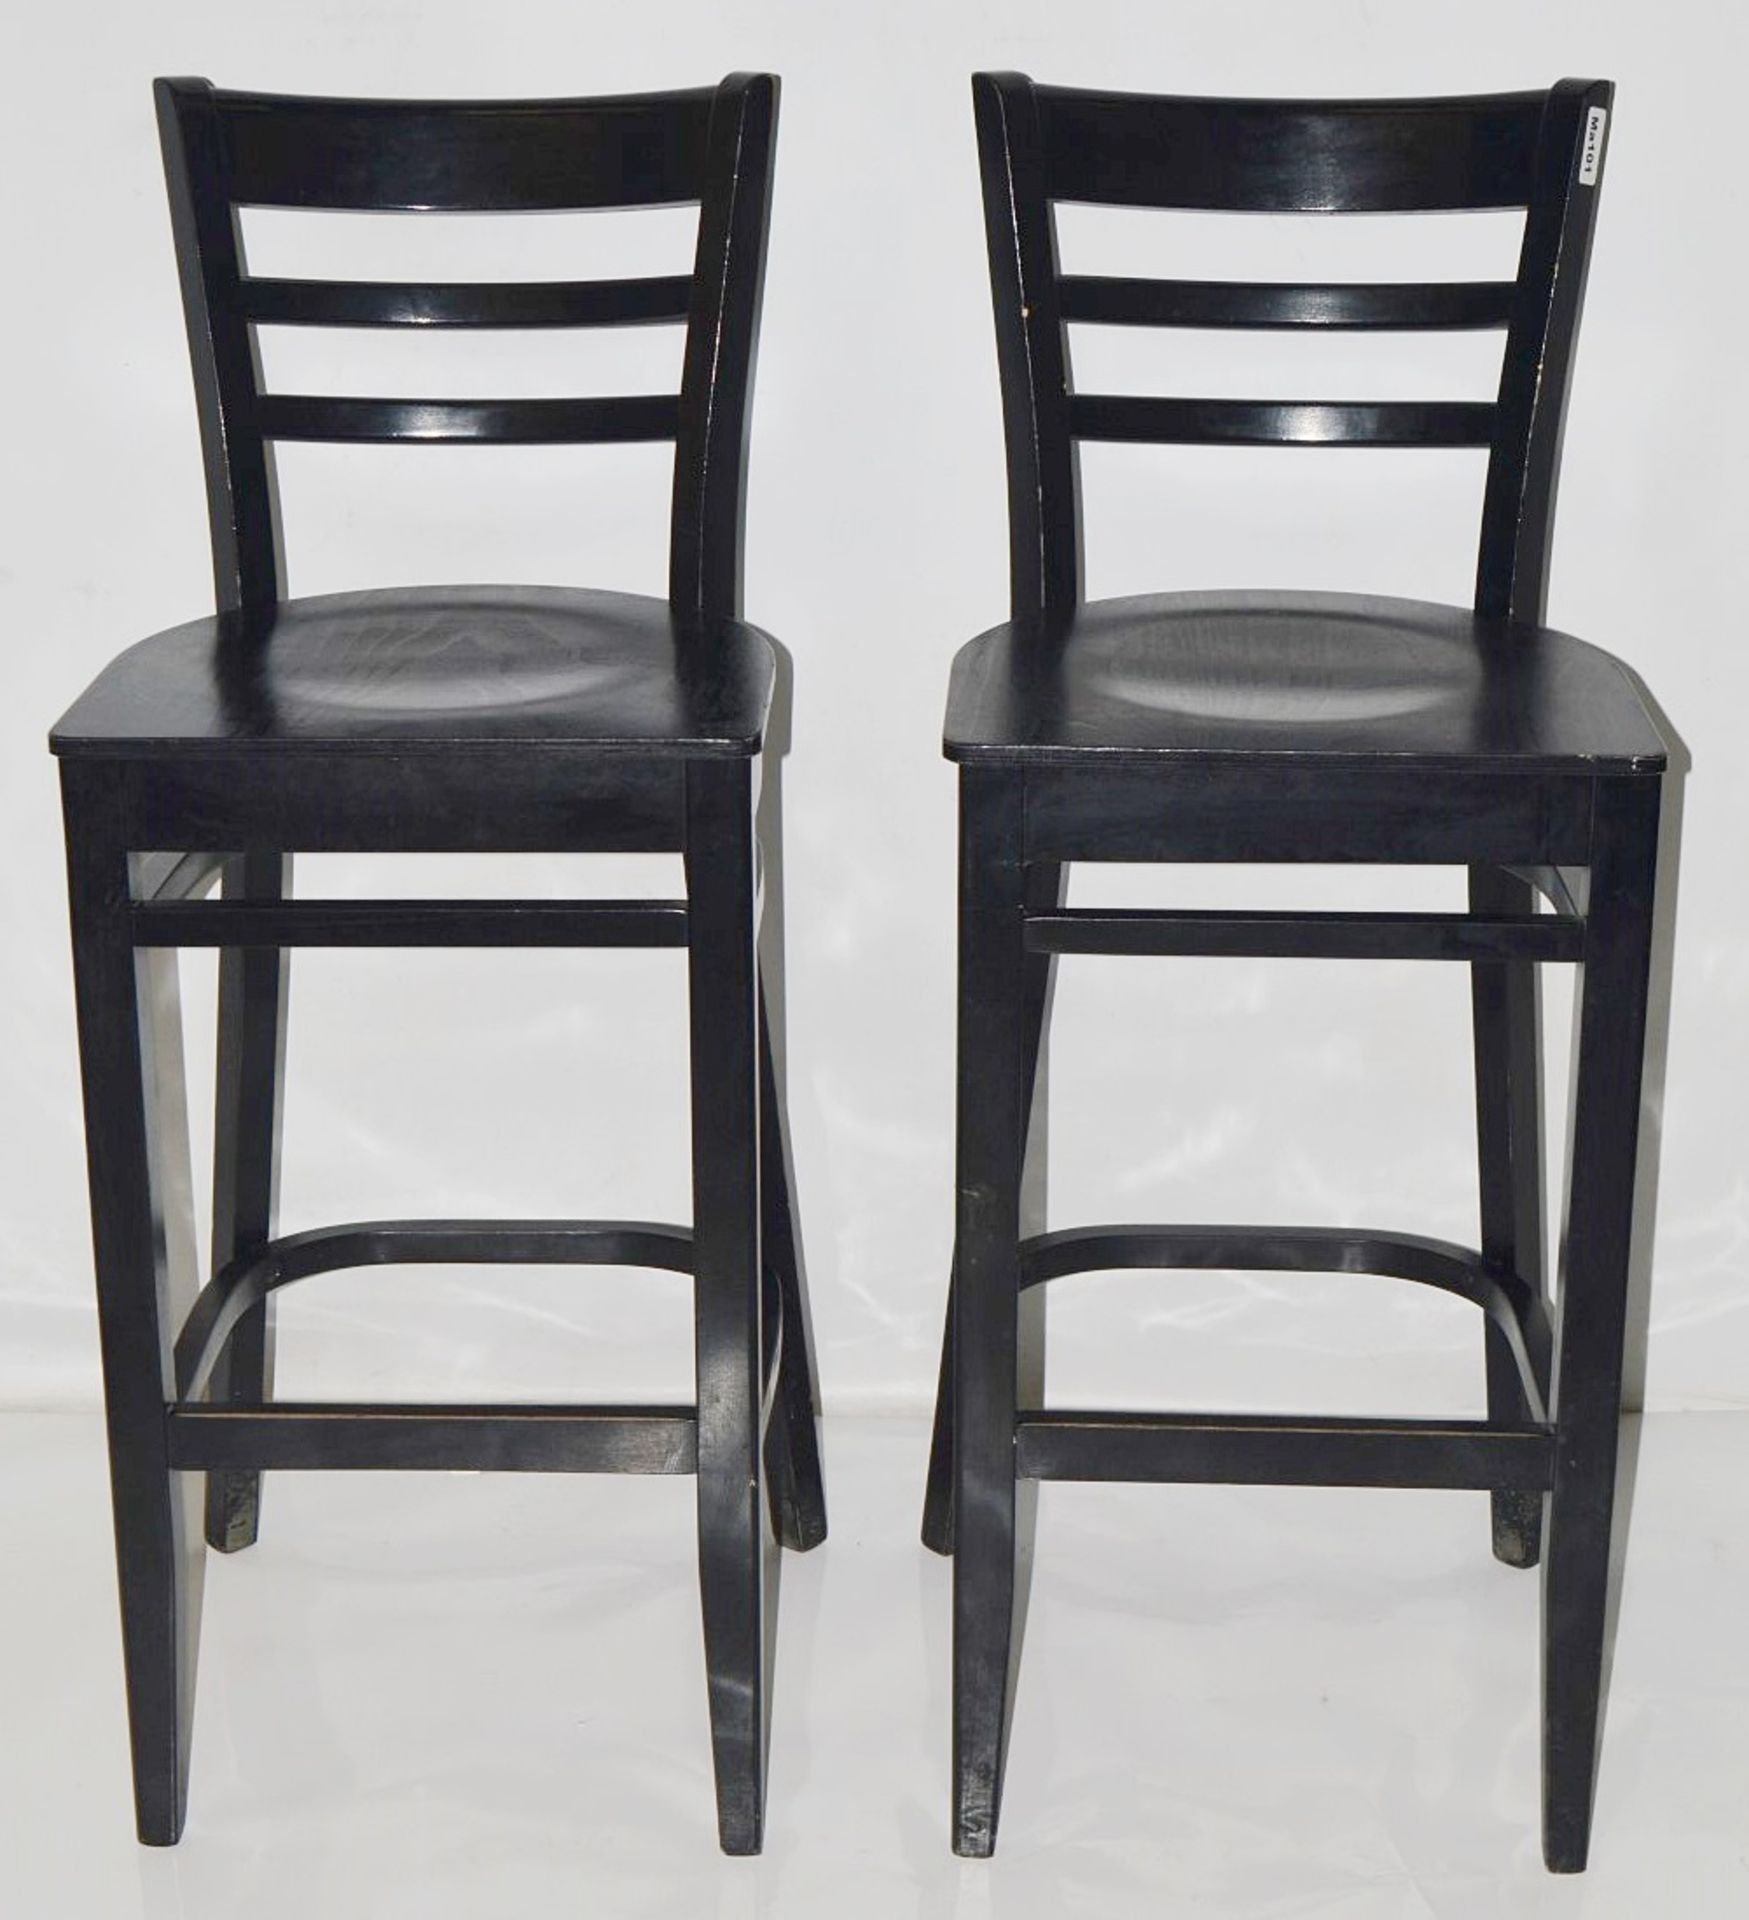 6 x Stylish Wooden Bar Stools In Black - Removed From A Leading Patisserie In London